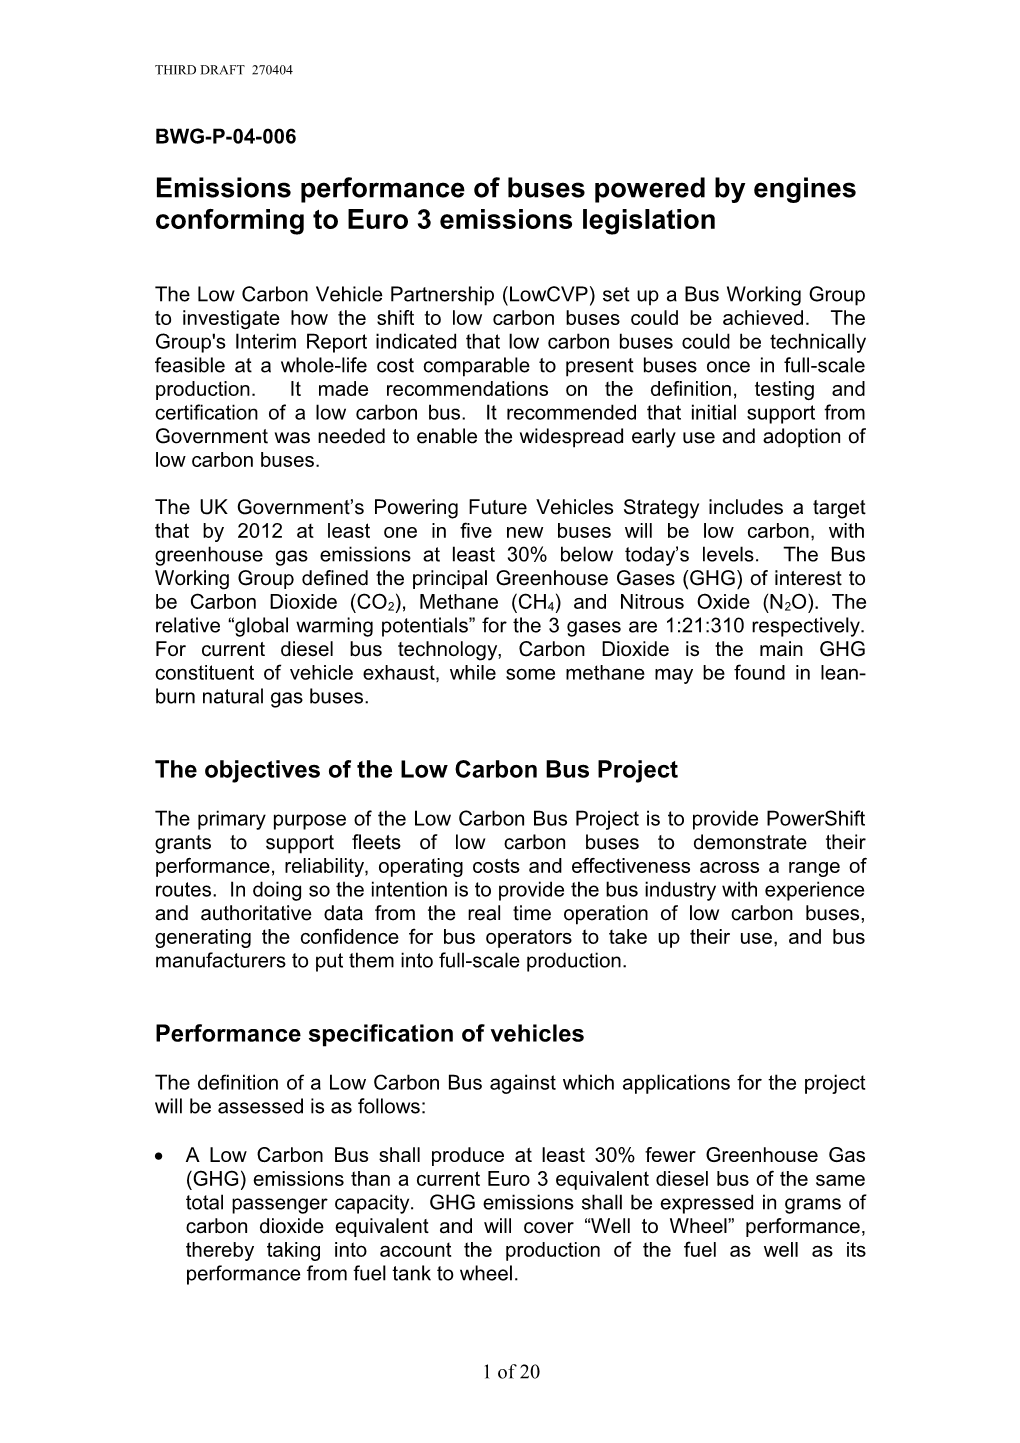 Report on Work Carried out to Date on Establishing of Emissions Performance of Buses Powered